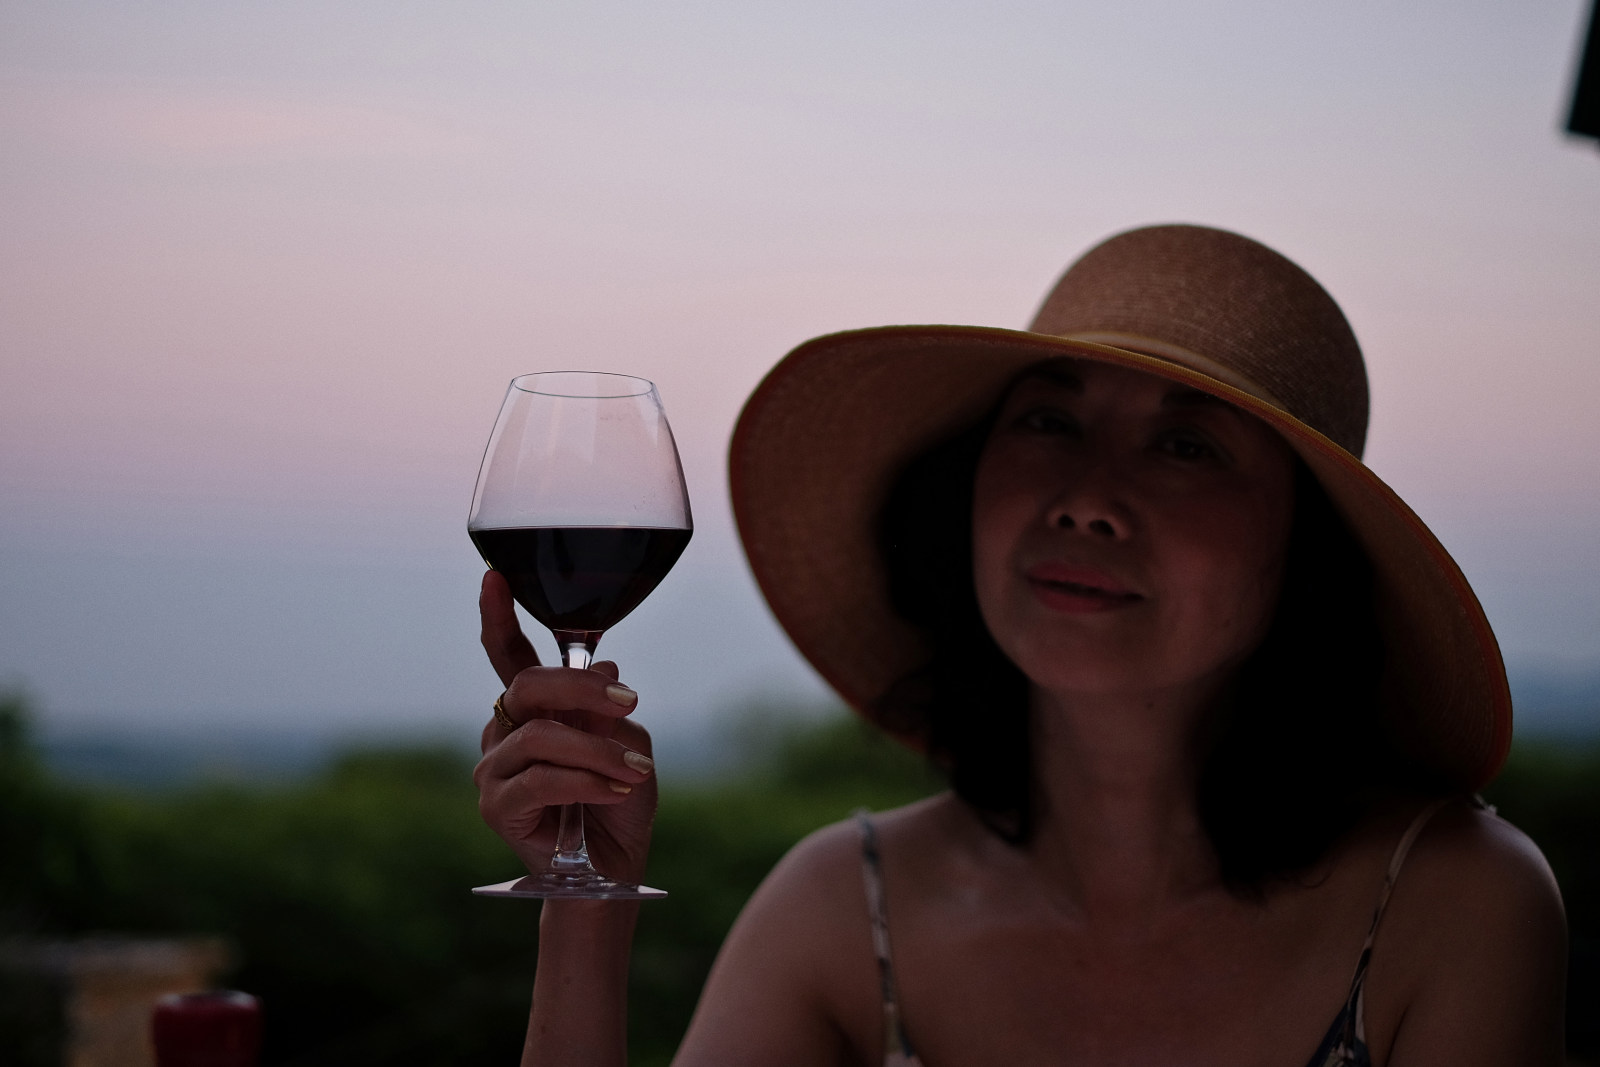 Relaxing with a glass of red wine and enjoying the sunset, Bagnols, France. Lifestyle photography by Kent Johnson.